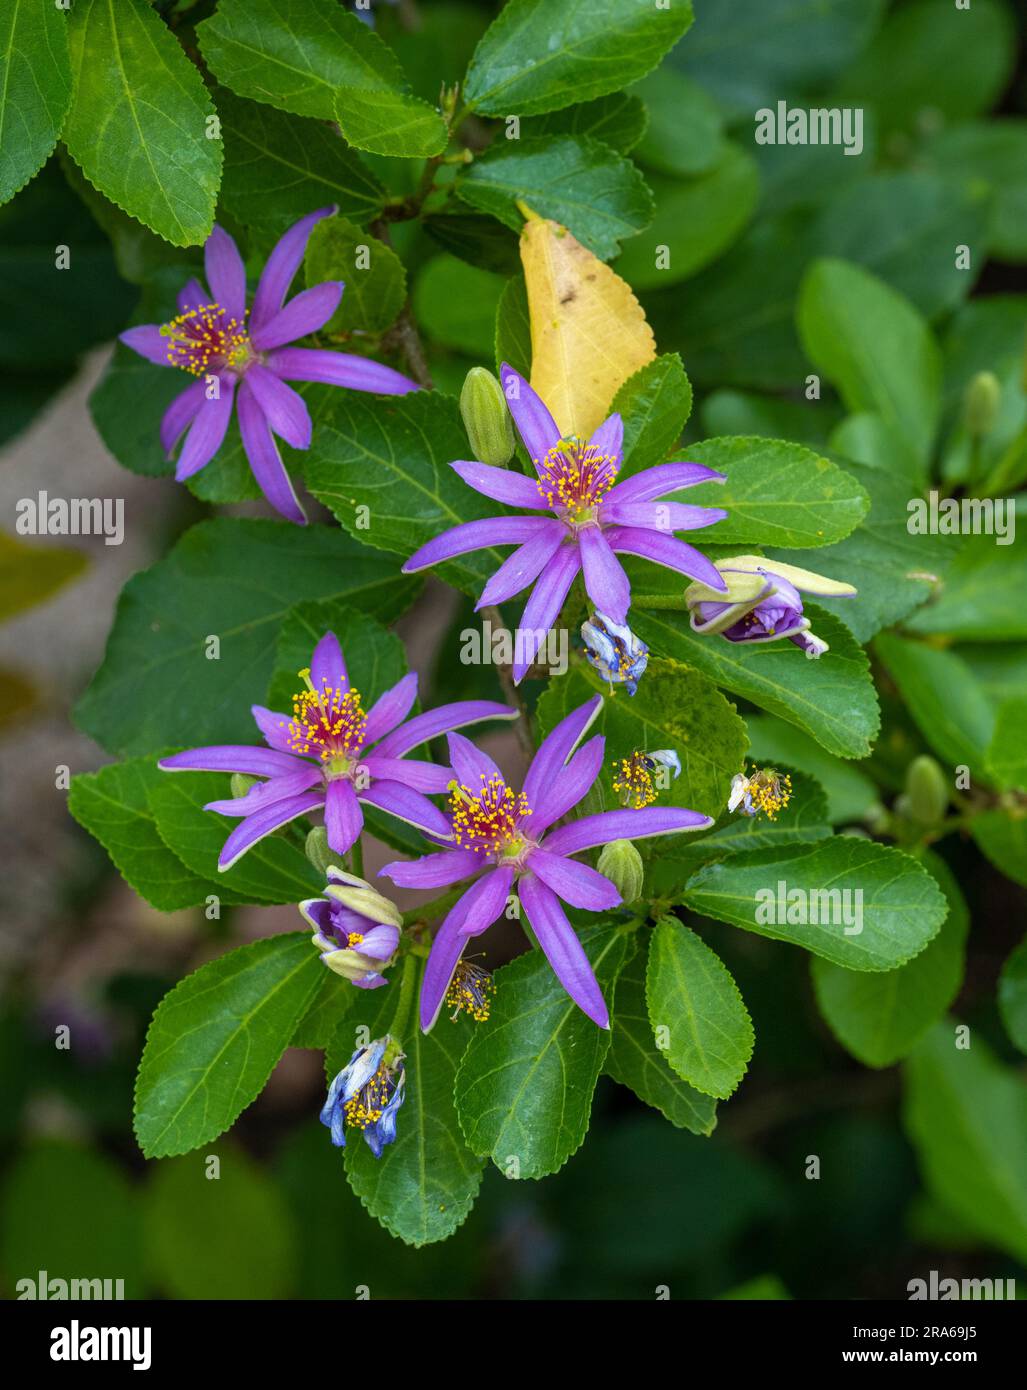 Grewia occidentalis, Crossberry, small deciduous tree with glossy leaves and purple star shaped flowers Stock Photo